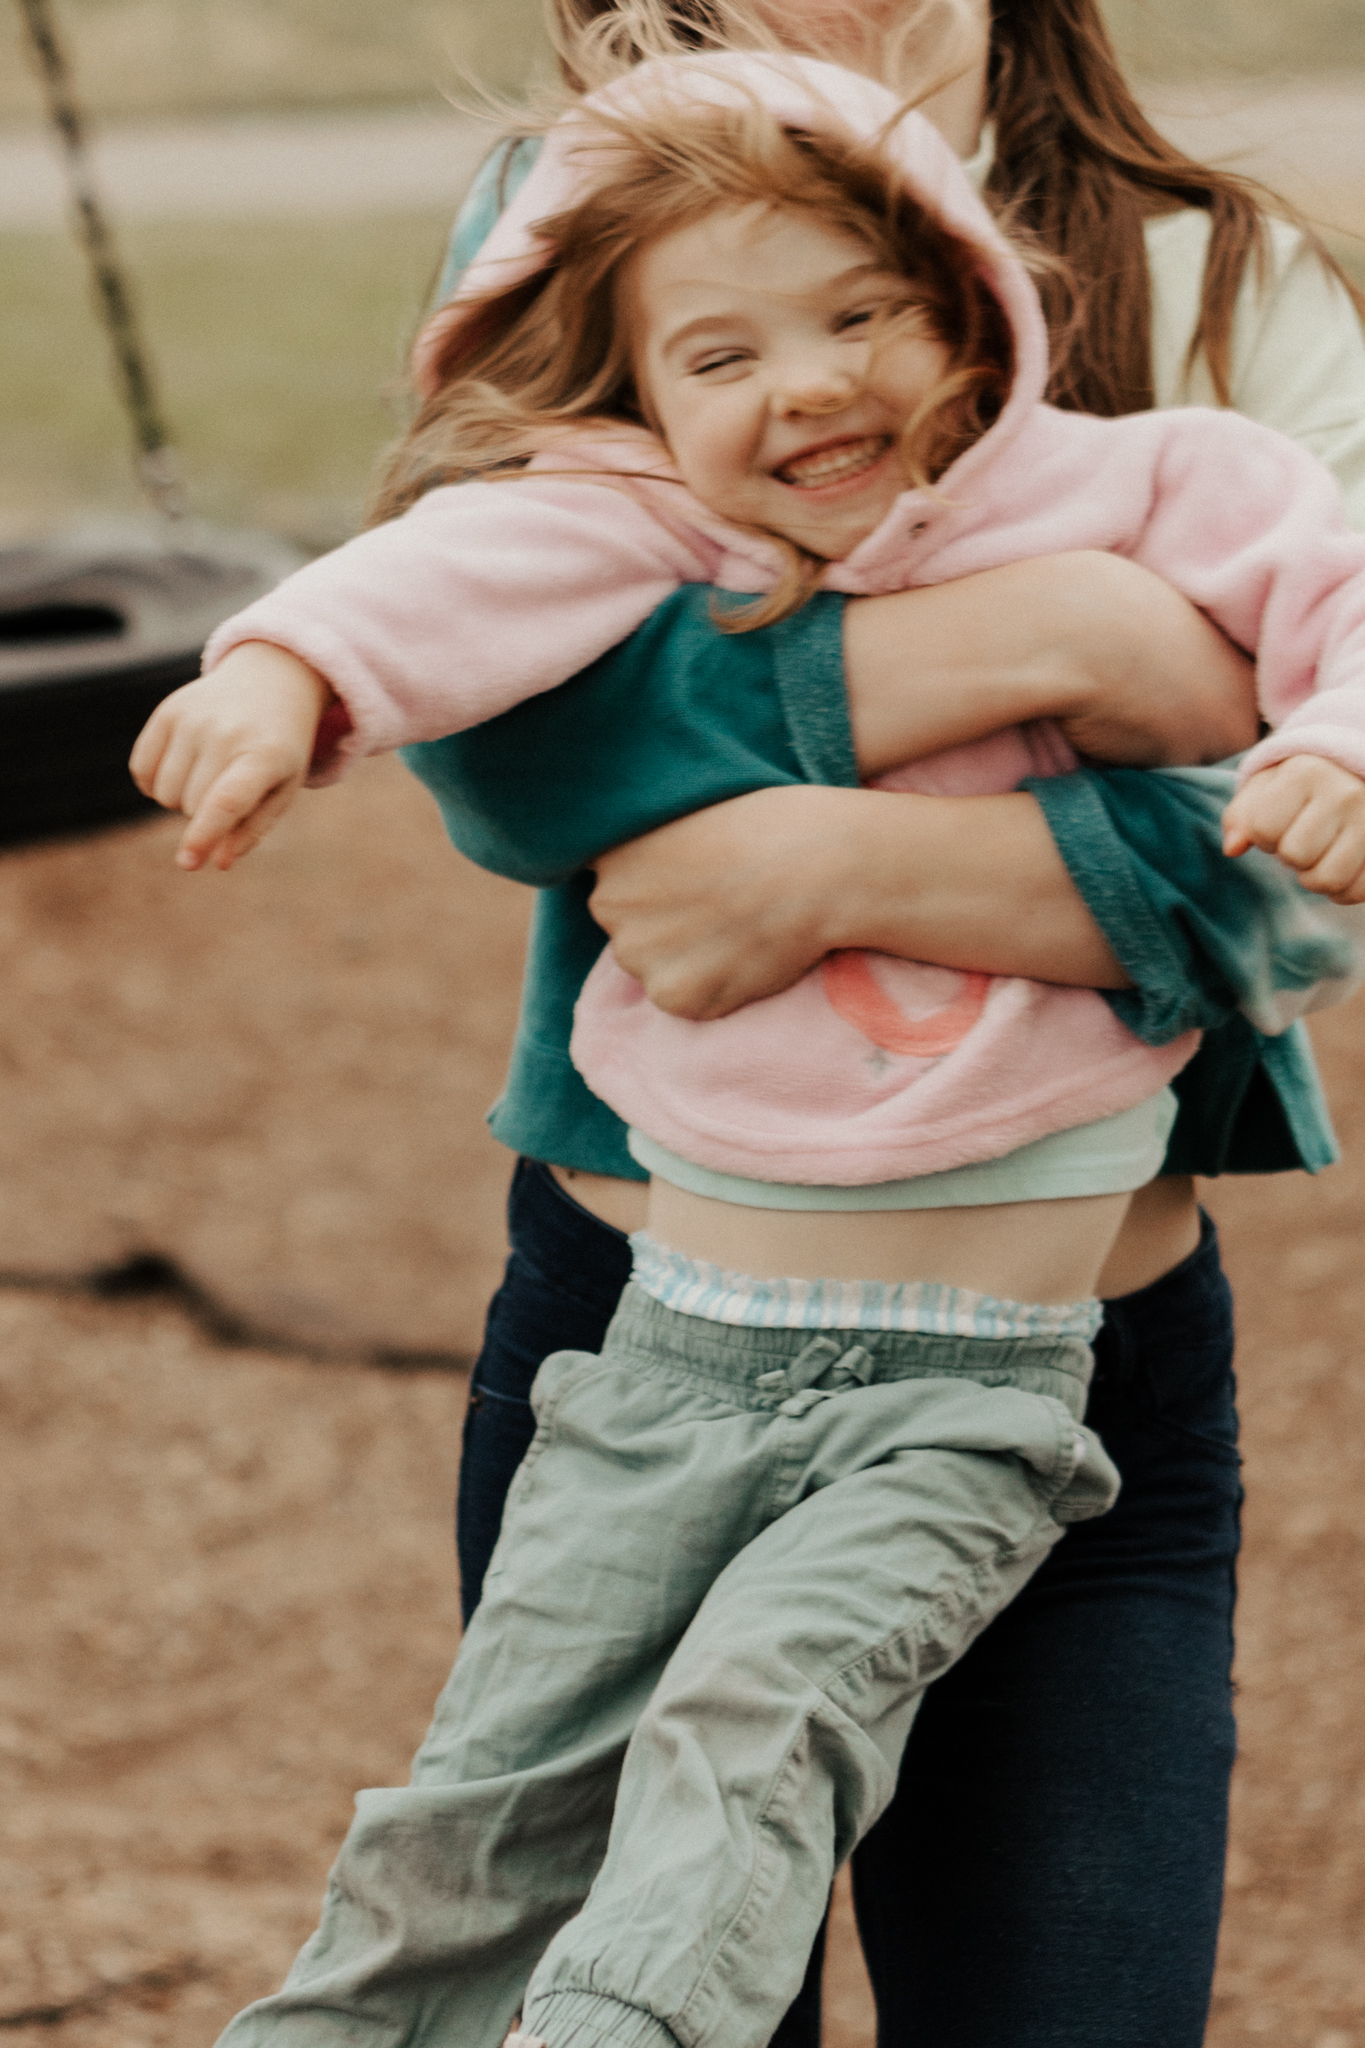 A teenager and toddler sisters playing in the park. The older sister picks up and swings around the toddler and they both laugh with hair flying.